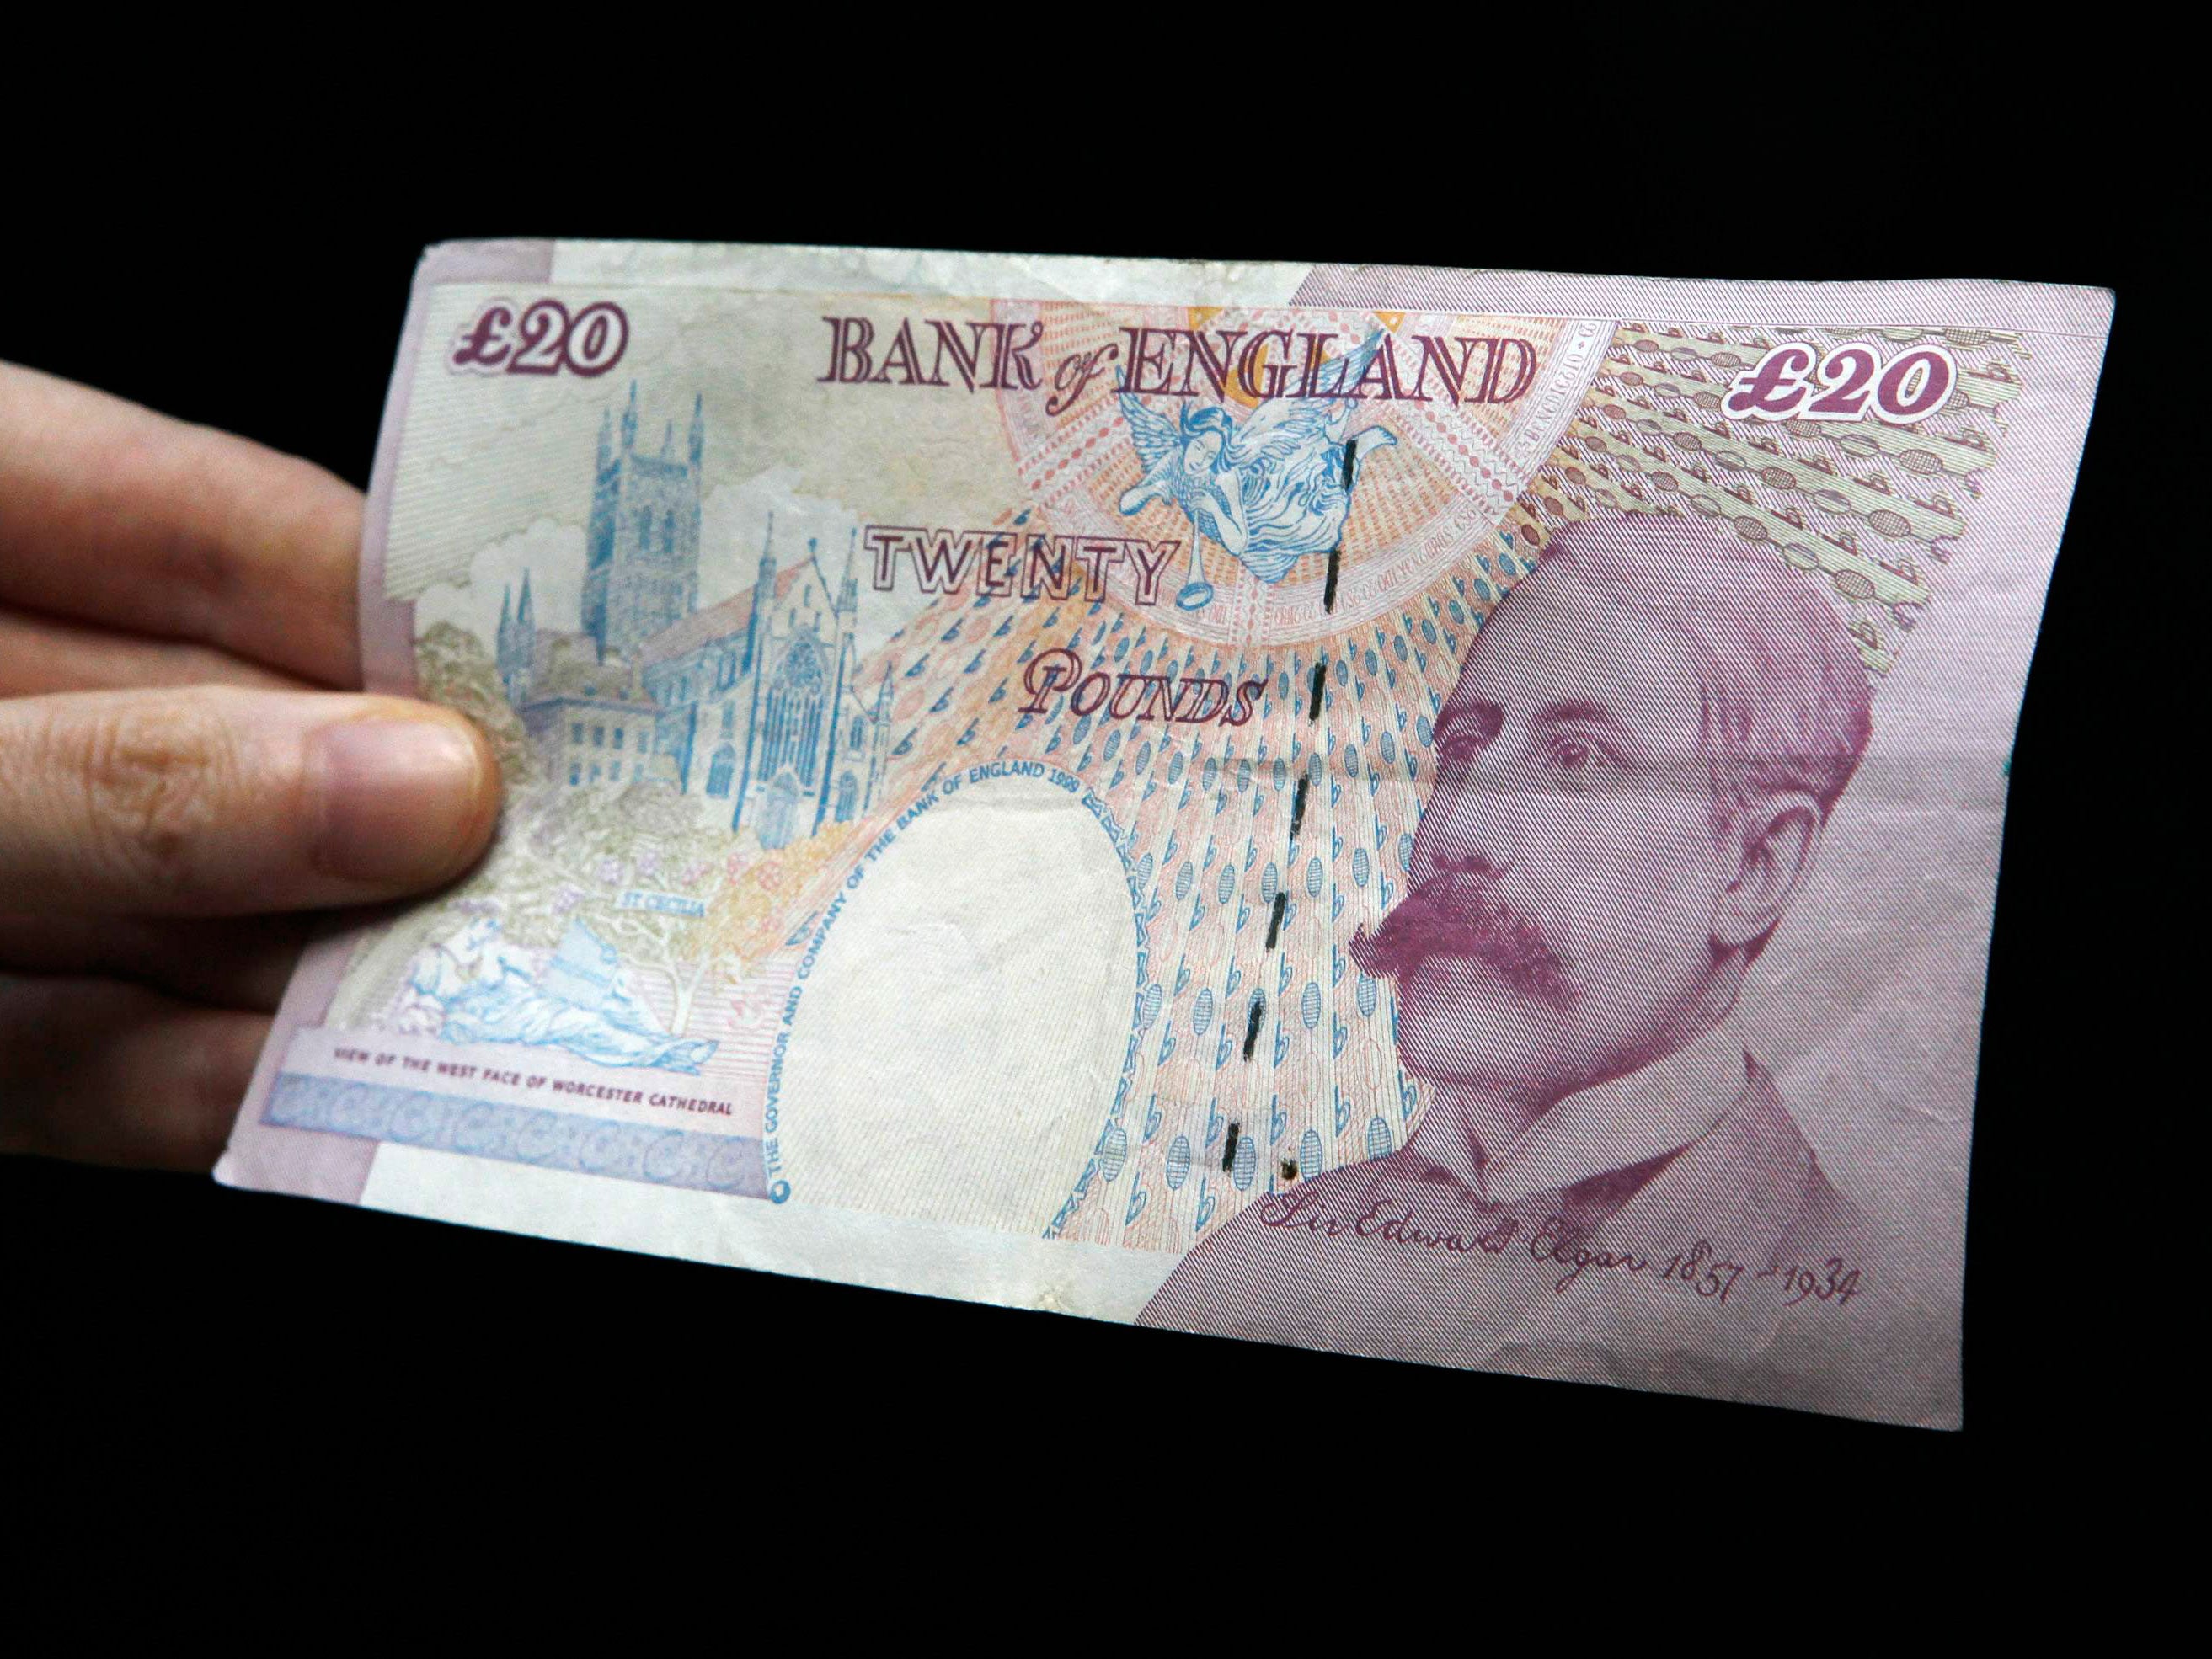 There was public outcry last time the Bank of England planned to switch the figureheads on bank notes